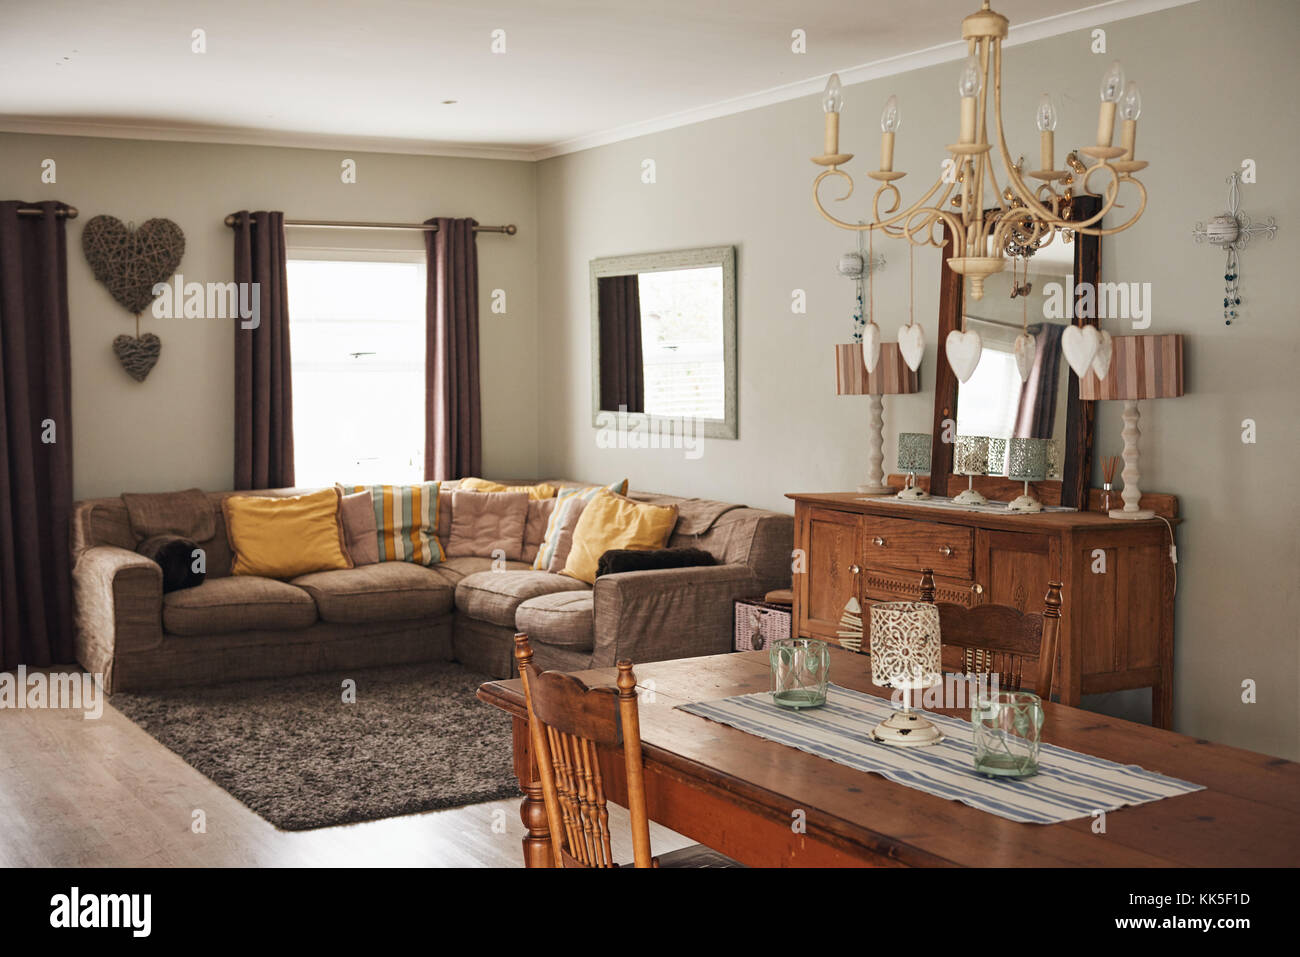 Interior of the lounge of a comfortable family home Stock Photo